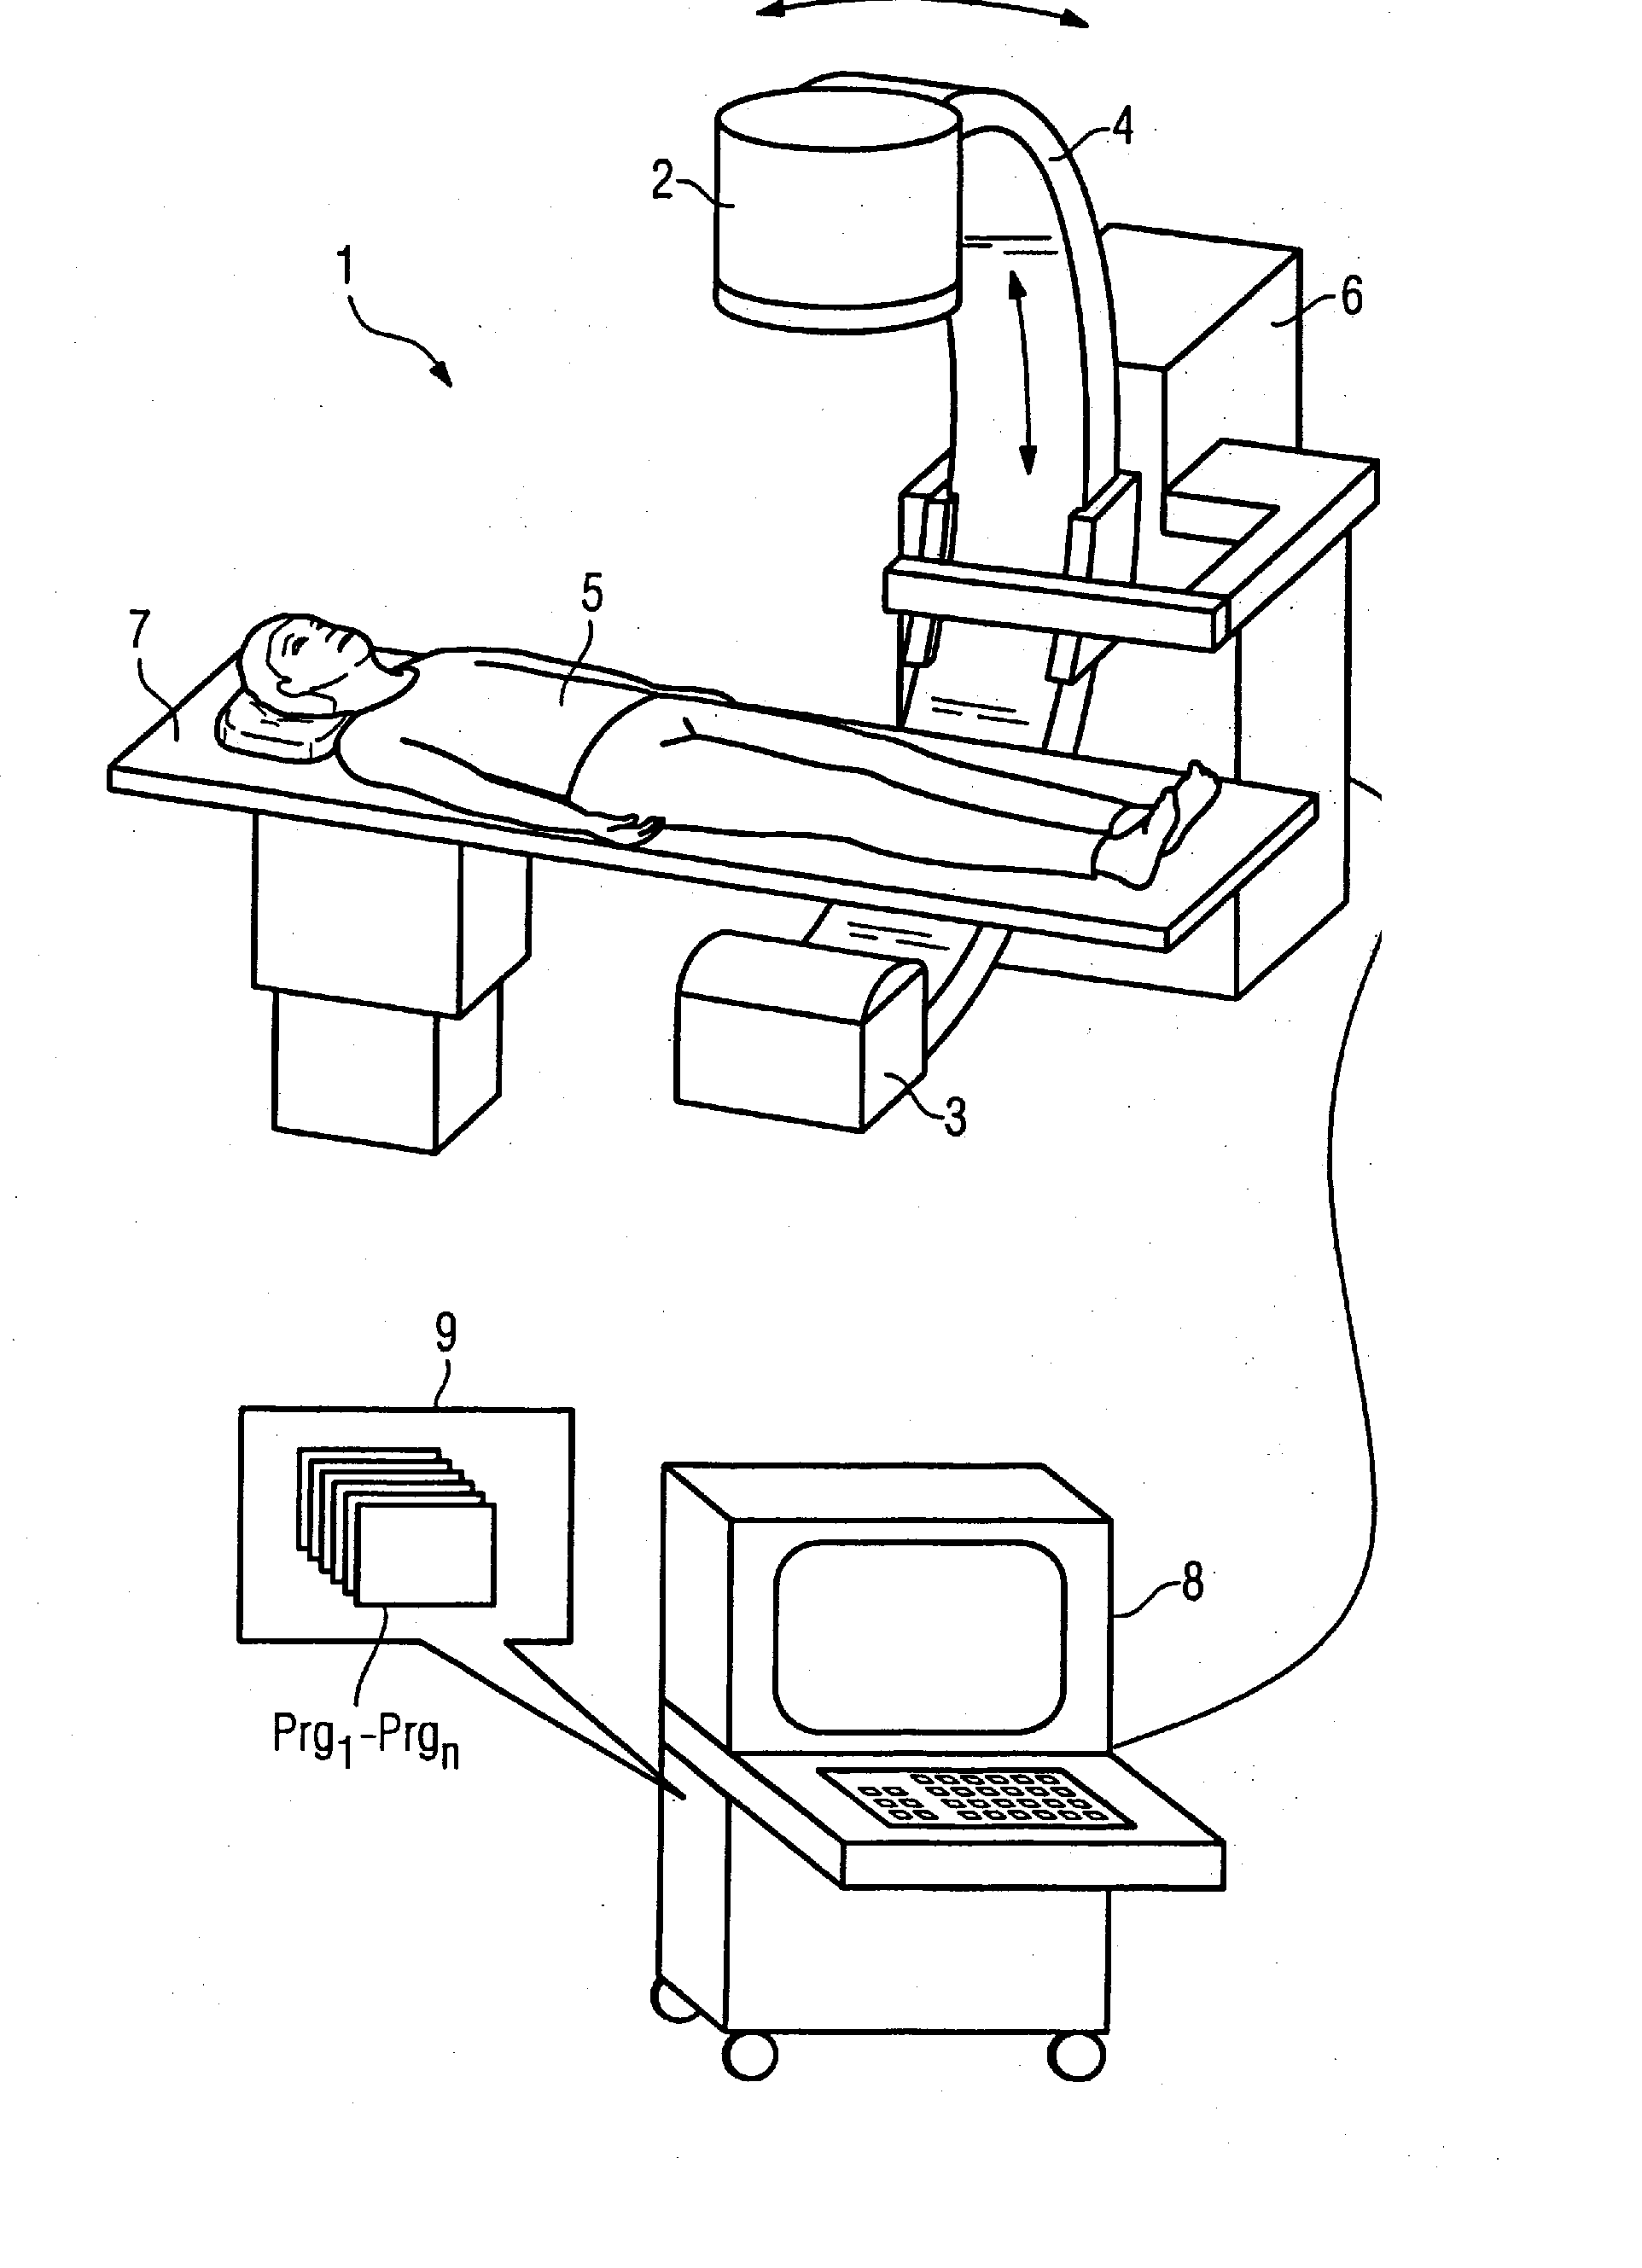 Scatter radiation correction in radiography and computed tomography employing flat panel detector